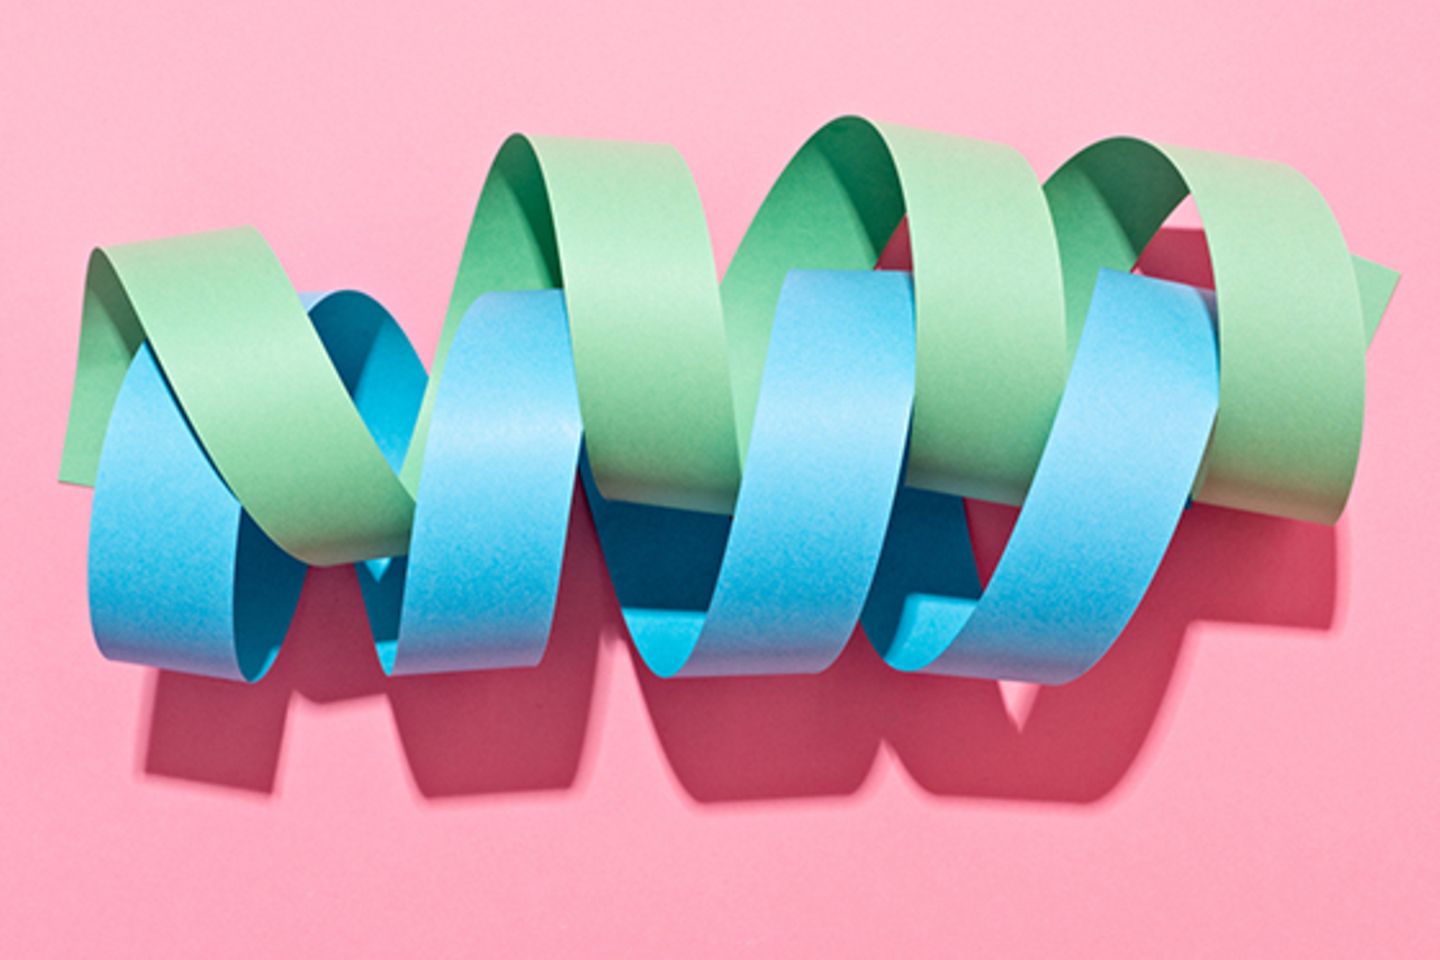 Green and blue paper spirals twisted into each other on a pink background.